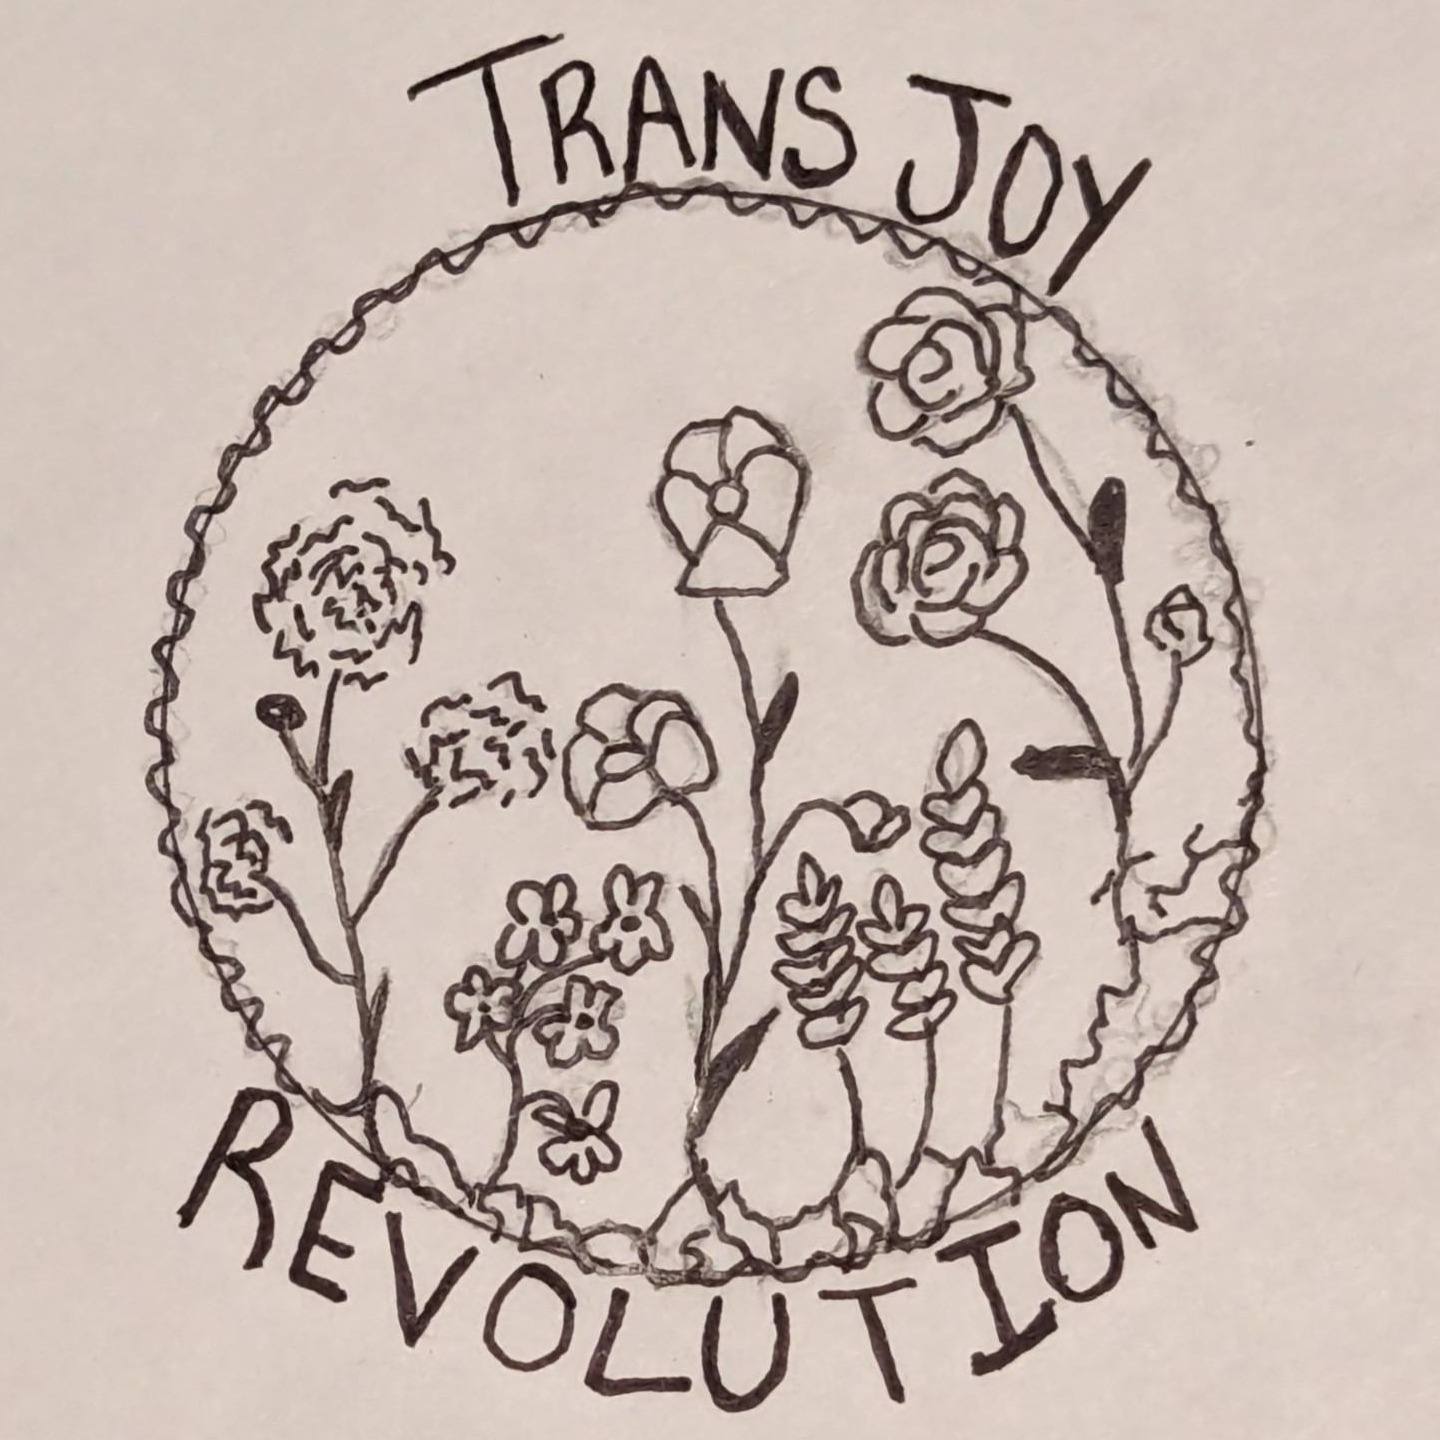 Trans Joy Revolution logo - flowers growing in a circle made of roots and vines with the words "Trans Joy Revolution"